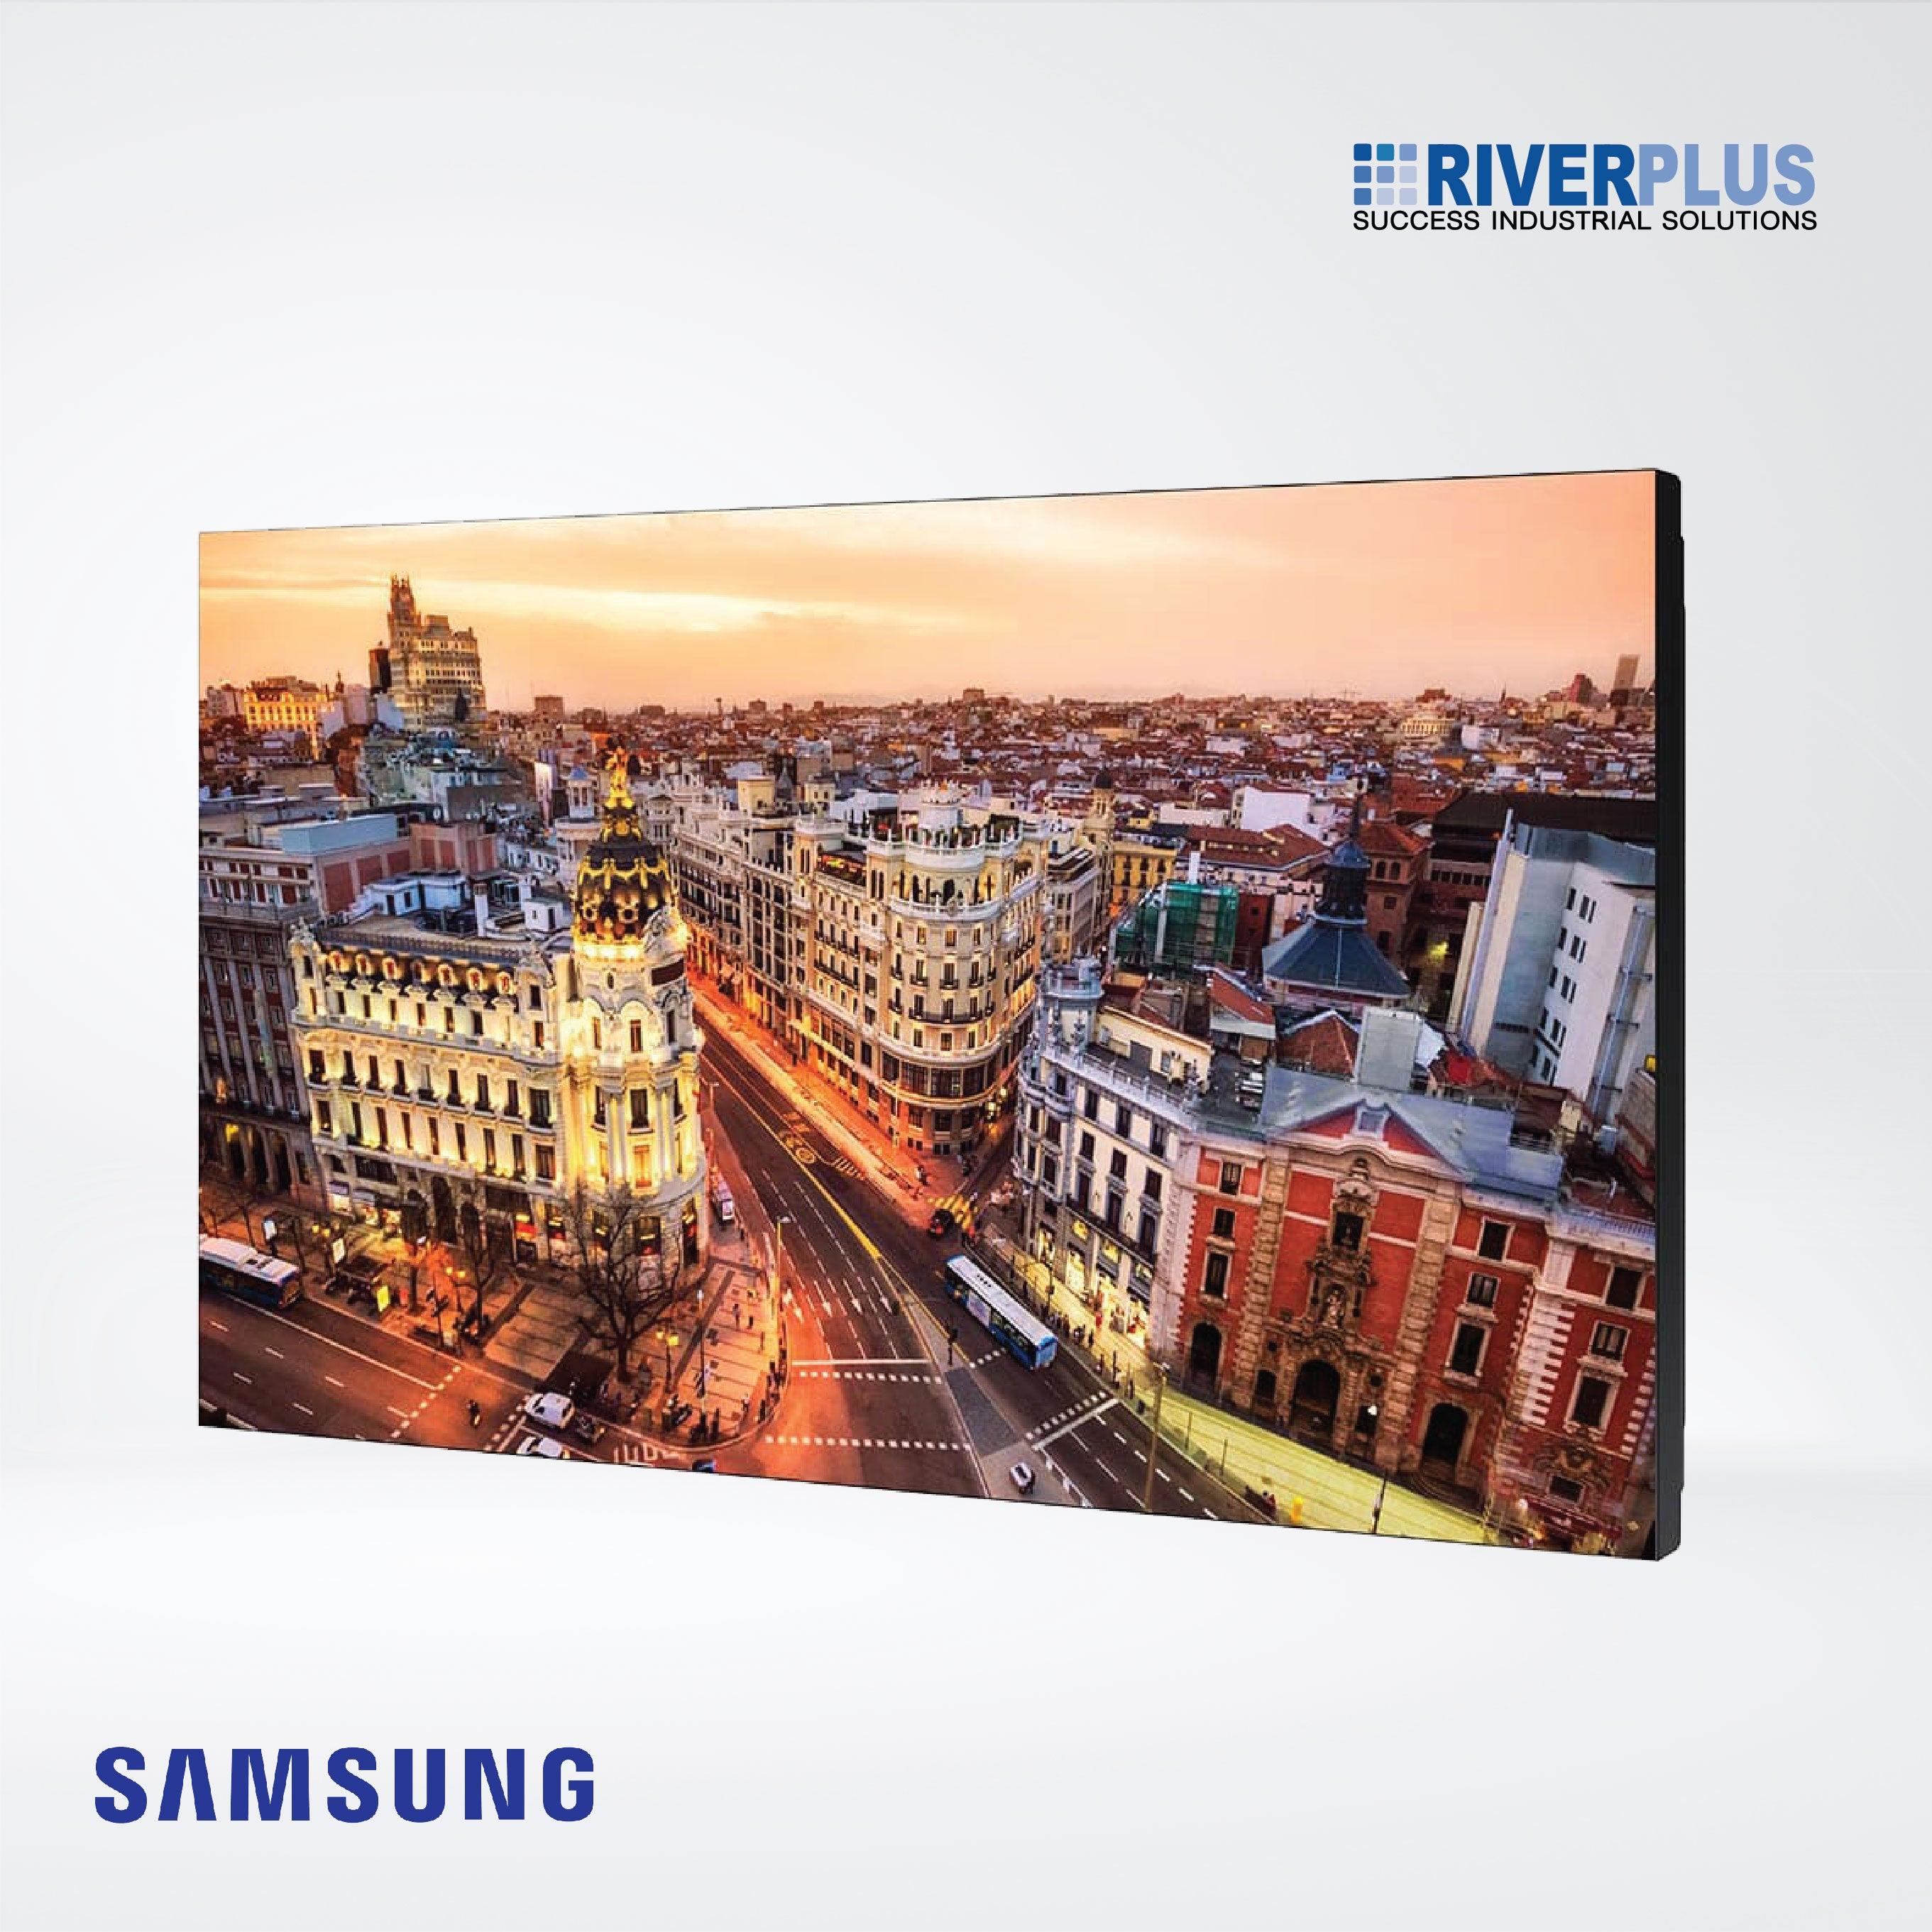 VH55T-E 55" Max 700 nit Always-on, space-saving solution delivering a seamless visual experience - Riverplus